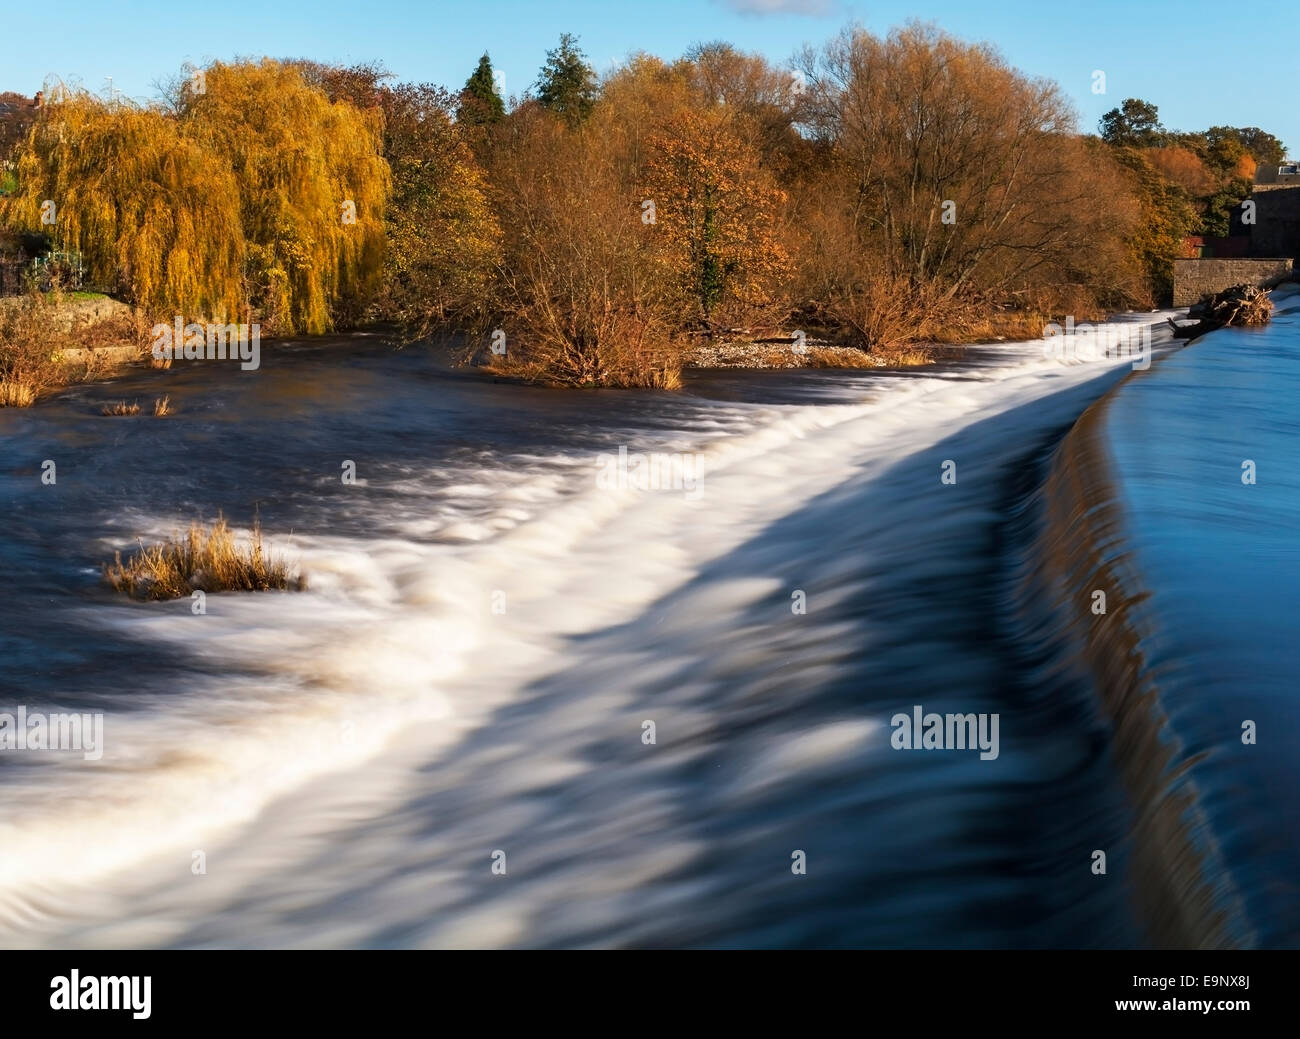 Looking along the weir on the River Wharfe at Otley West Yorkshire on a bright autumn day. Stock Photo